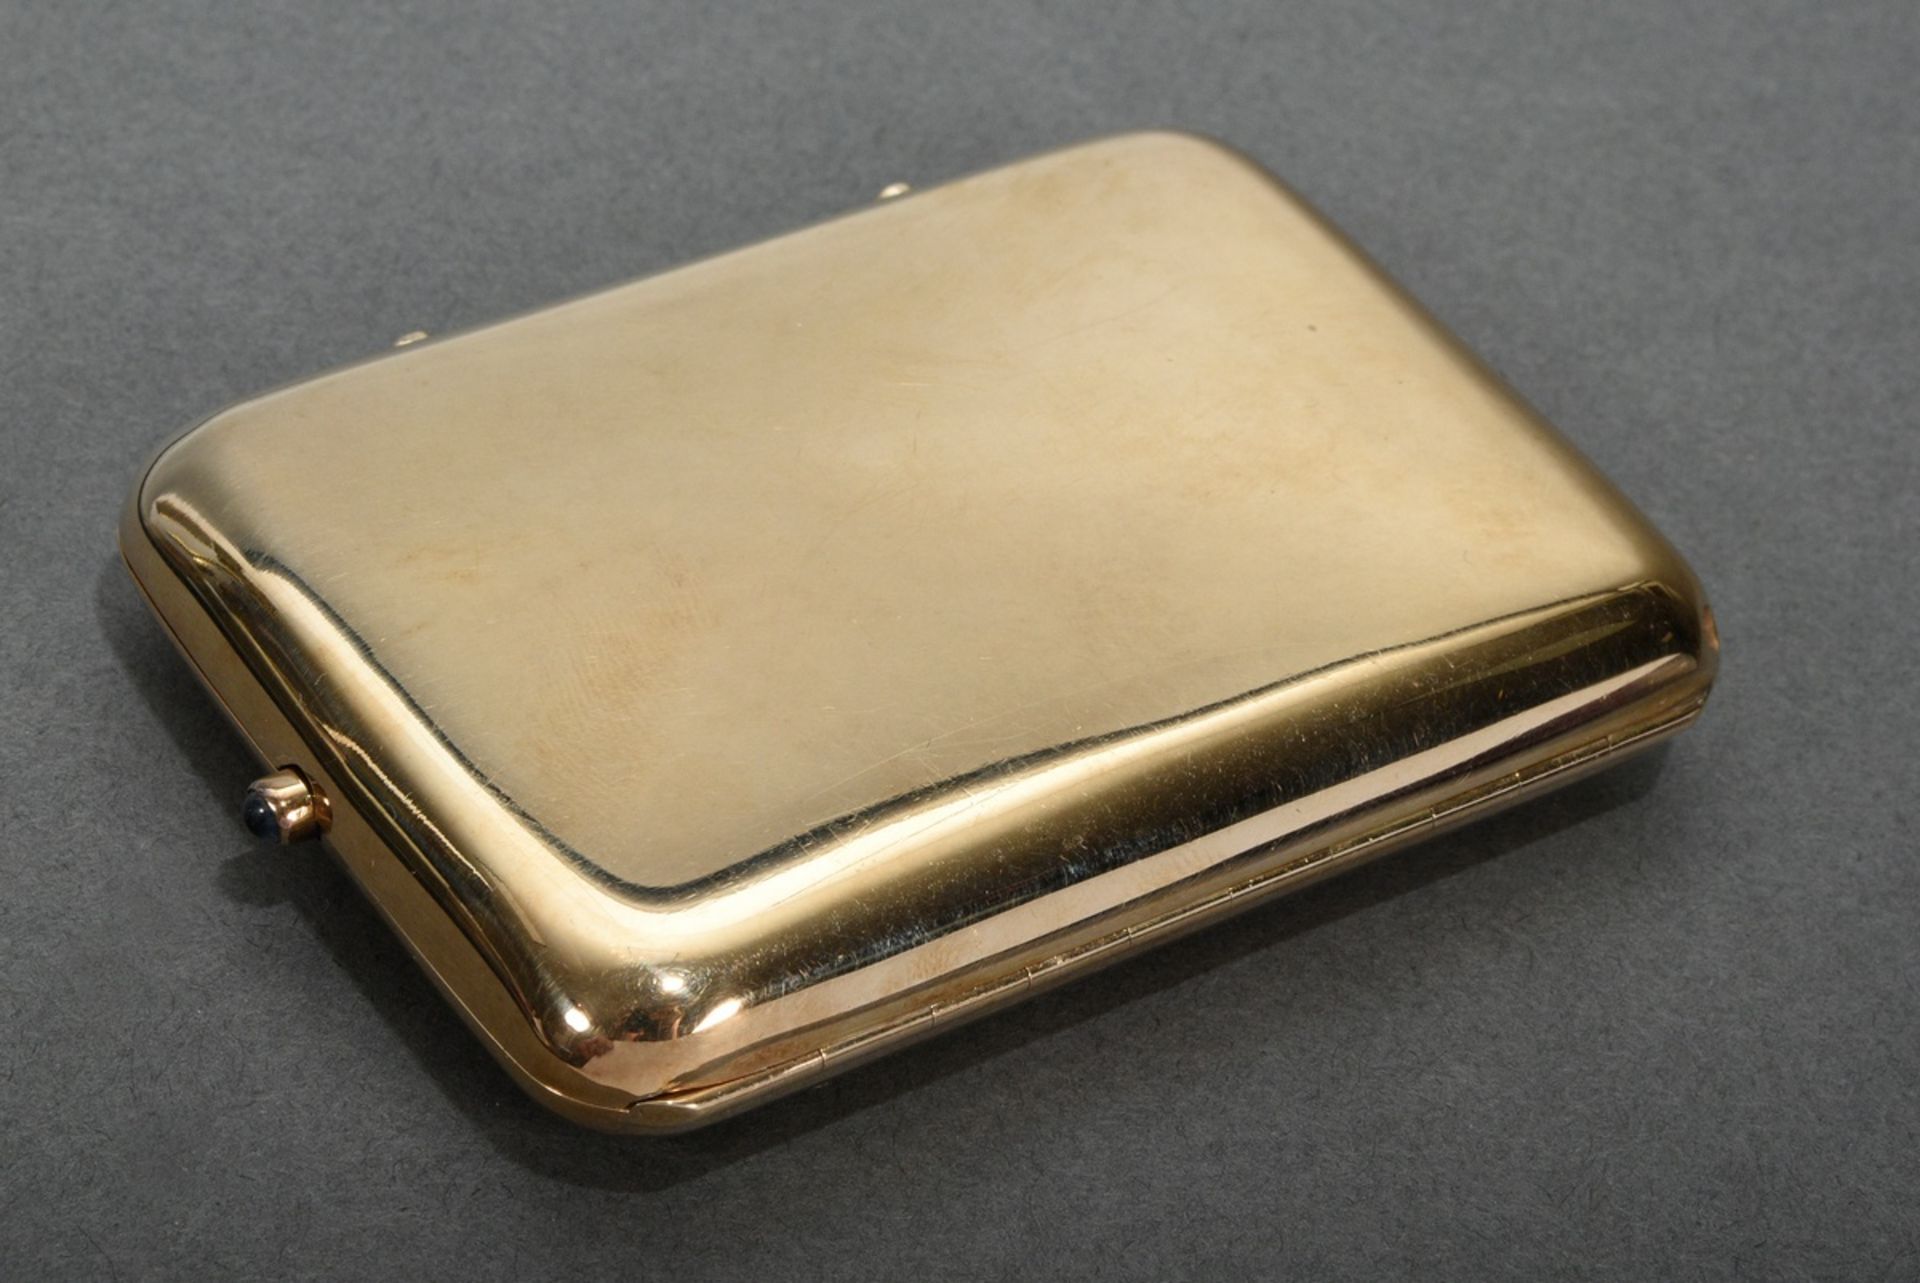 Heavy yellow gold 585 box with several compartments and mirror, Austria-Hungary c. 1900/1920, insid - Image 2 of 8